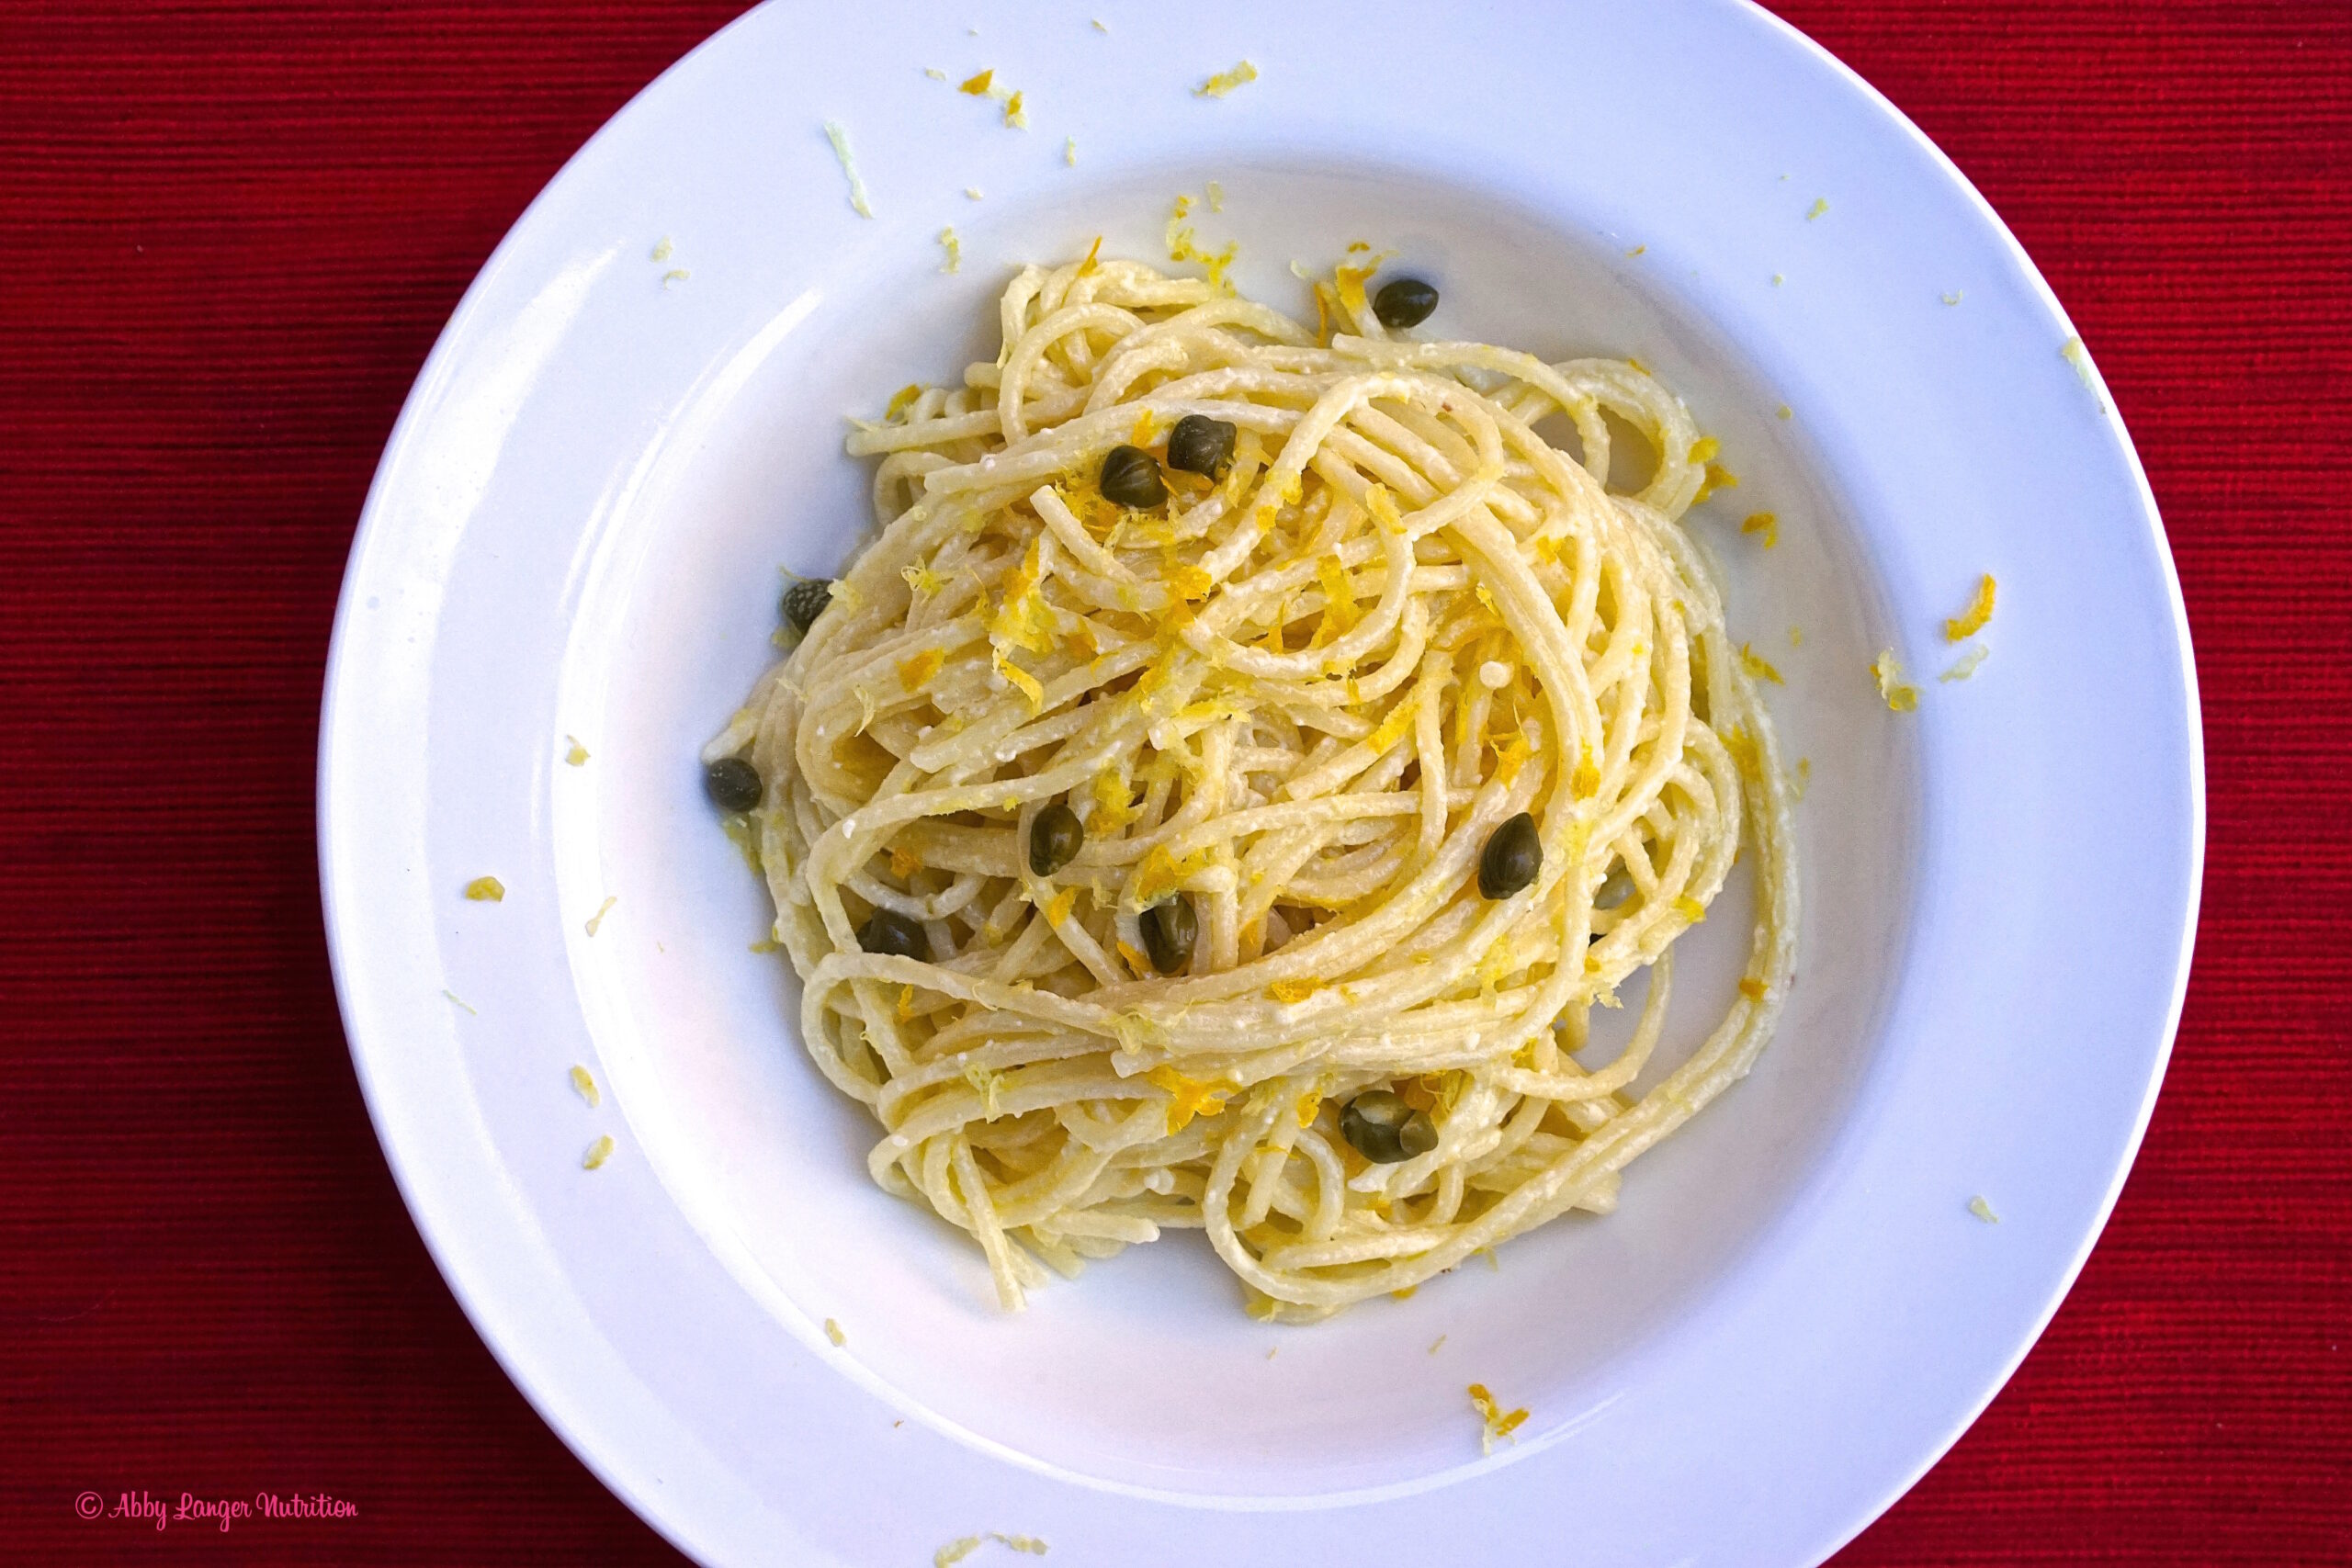 Pasta with lemon sauce and capers